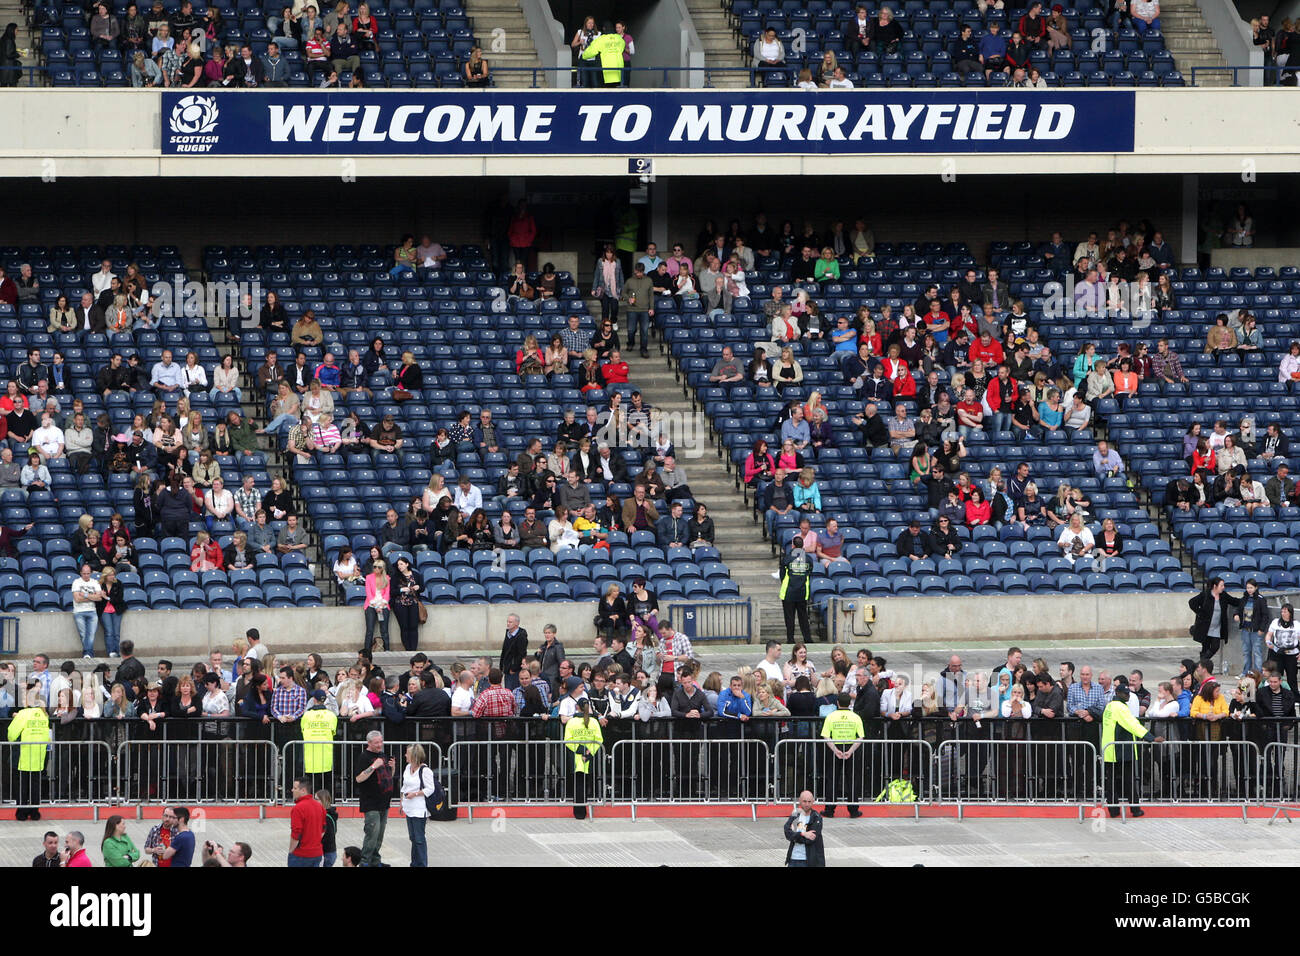 Madonna in concert - Edinburgh. Madonna fans at fill up the Stadium bowl at Murrayfield Stock Photo